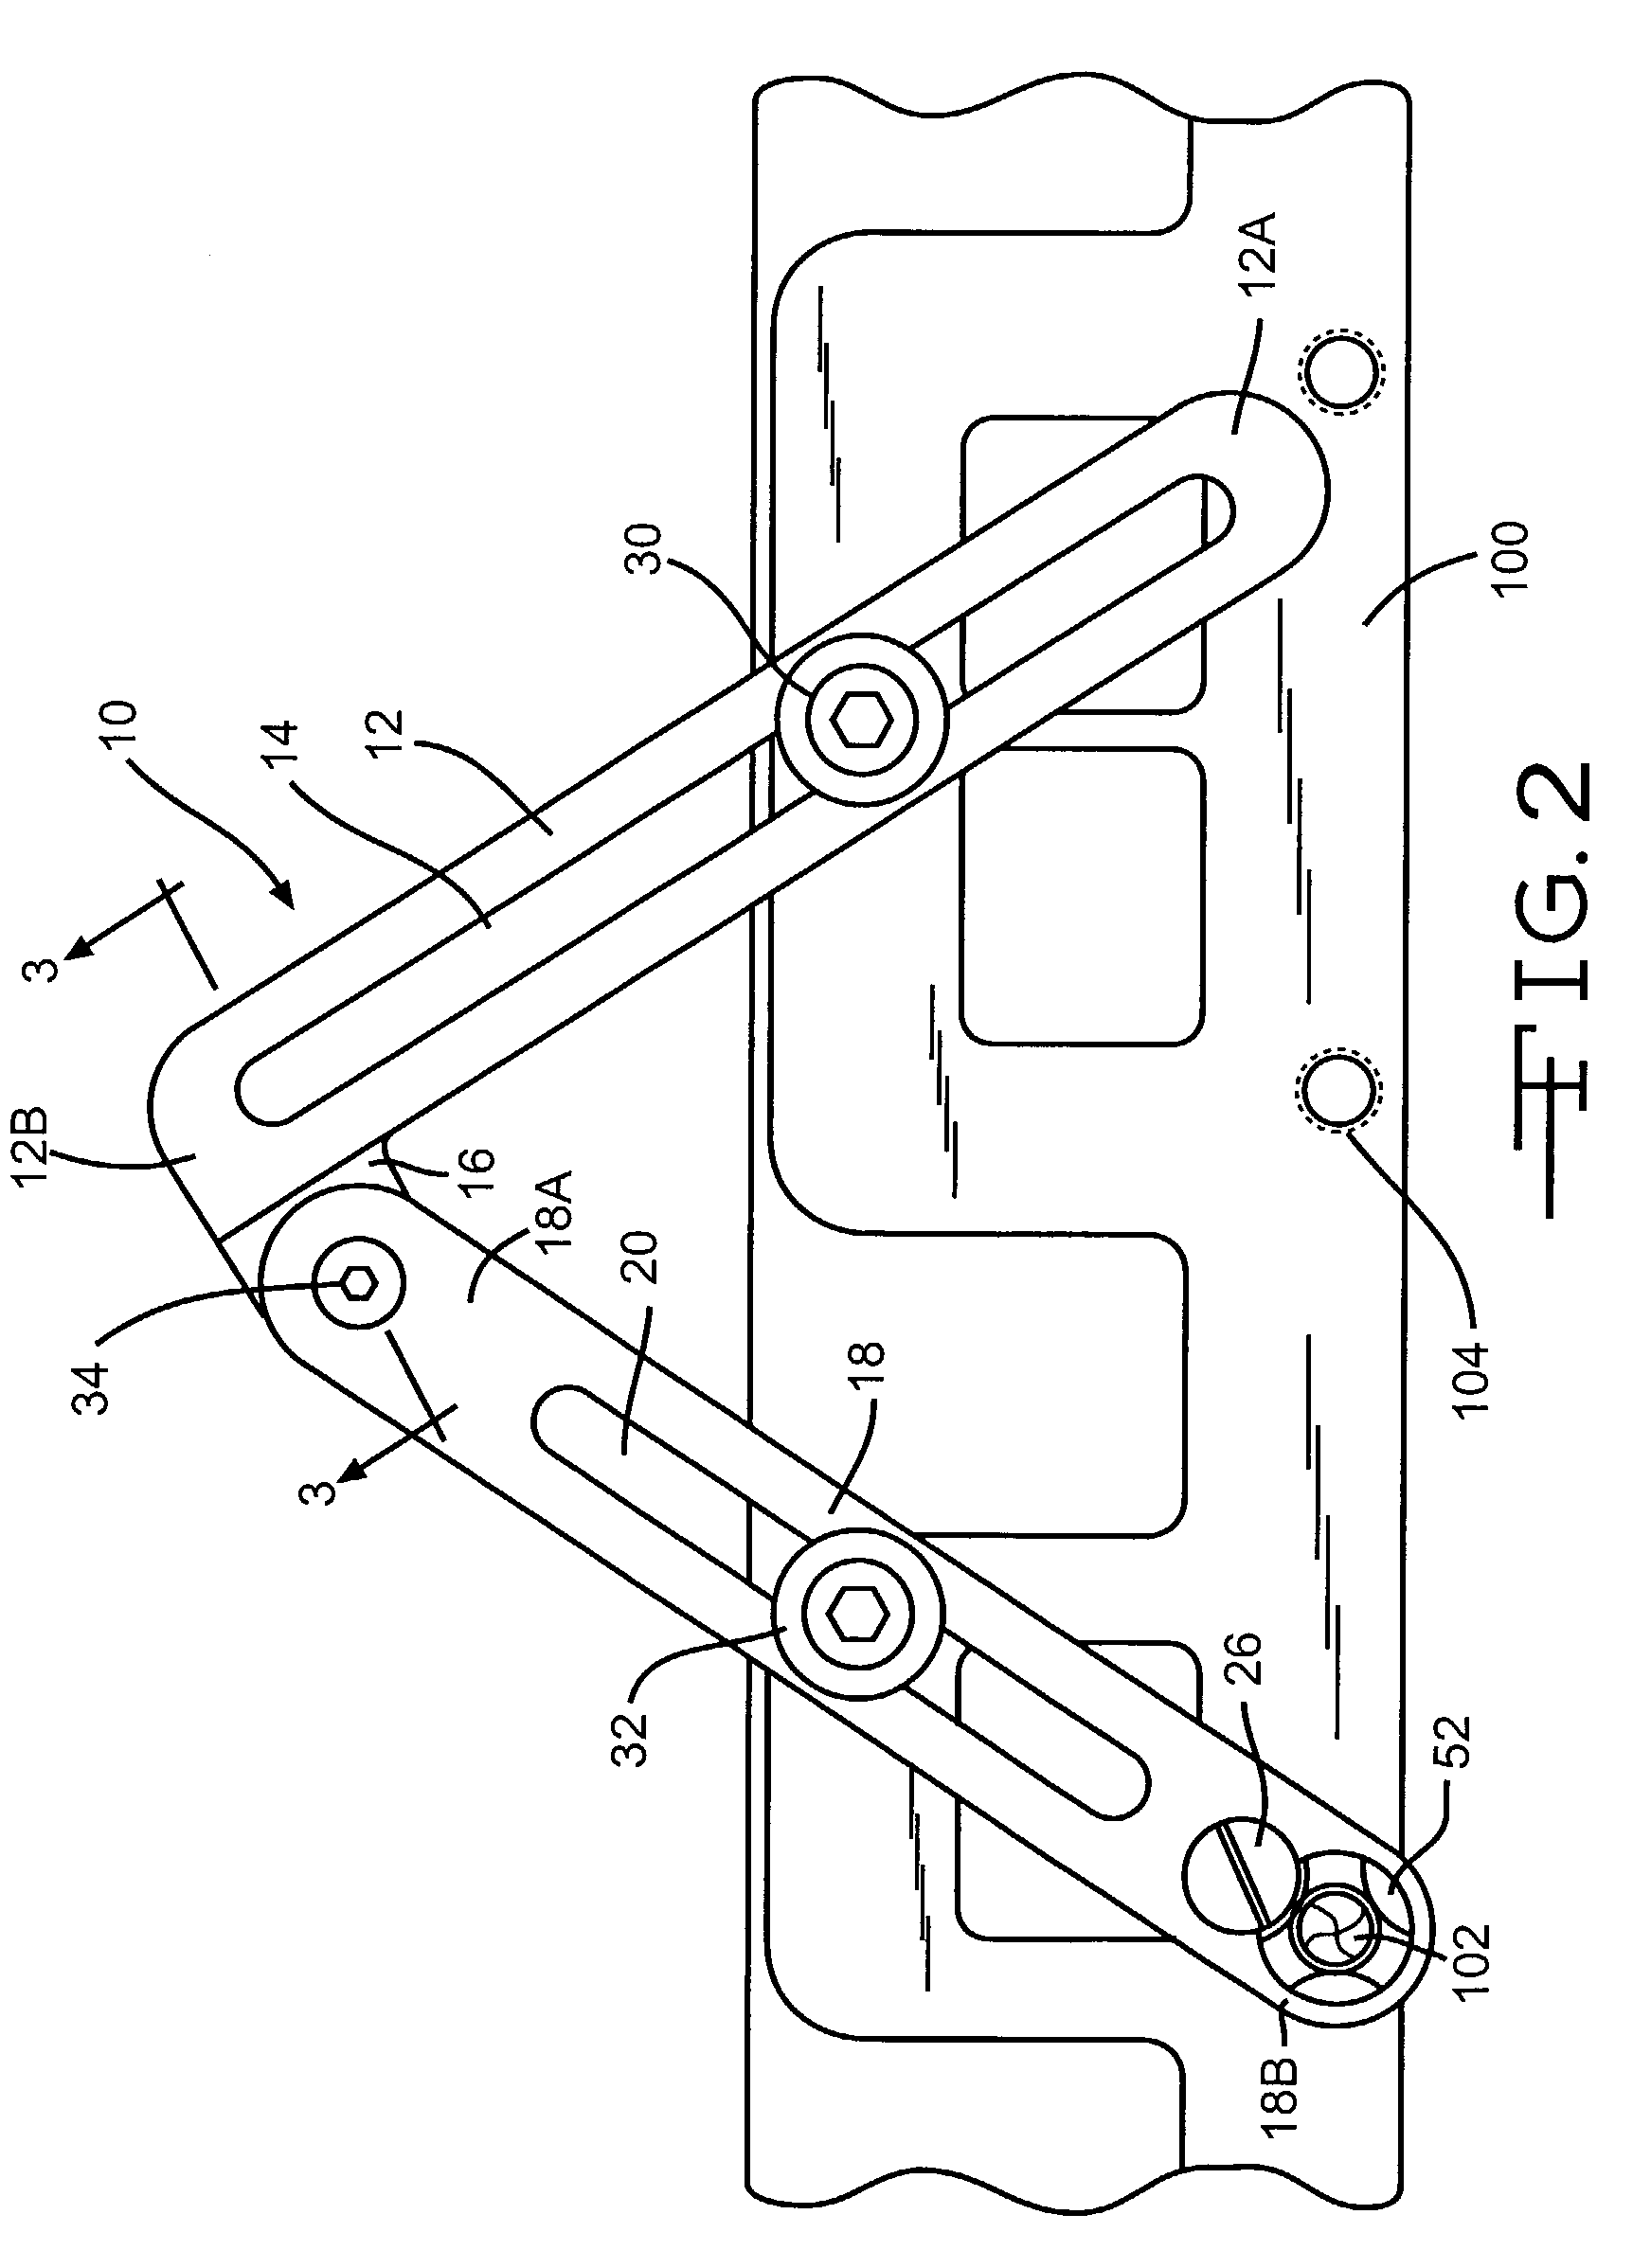 Tool for removing an object from a workpiece